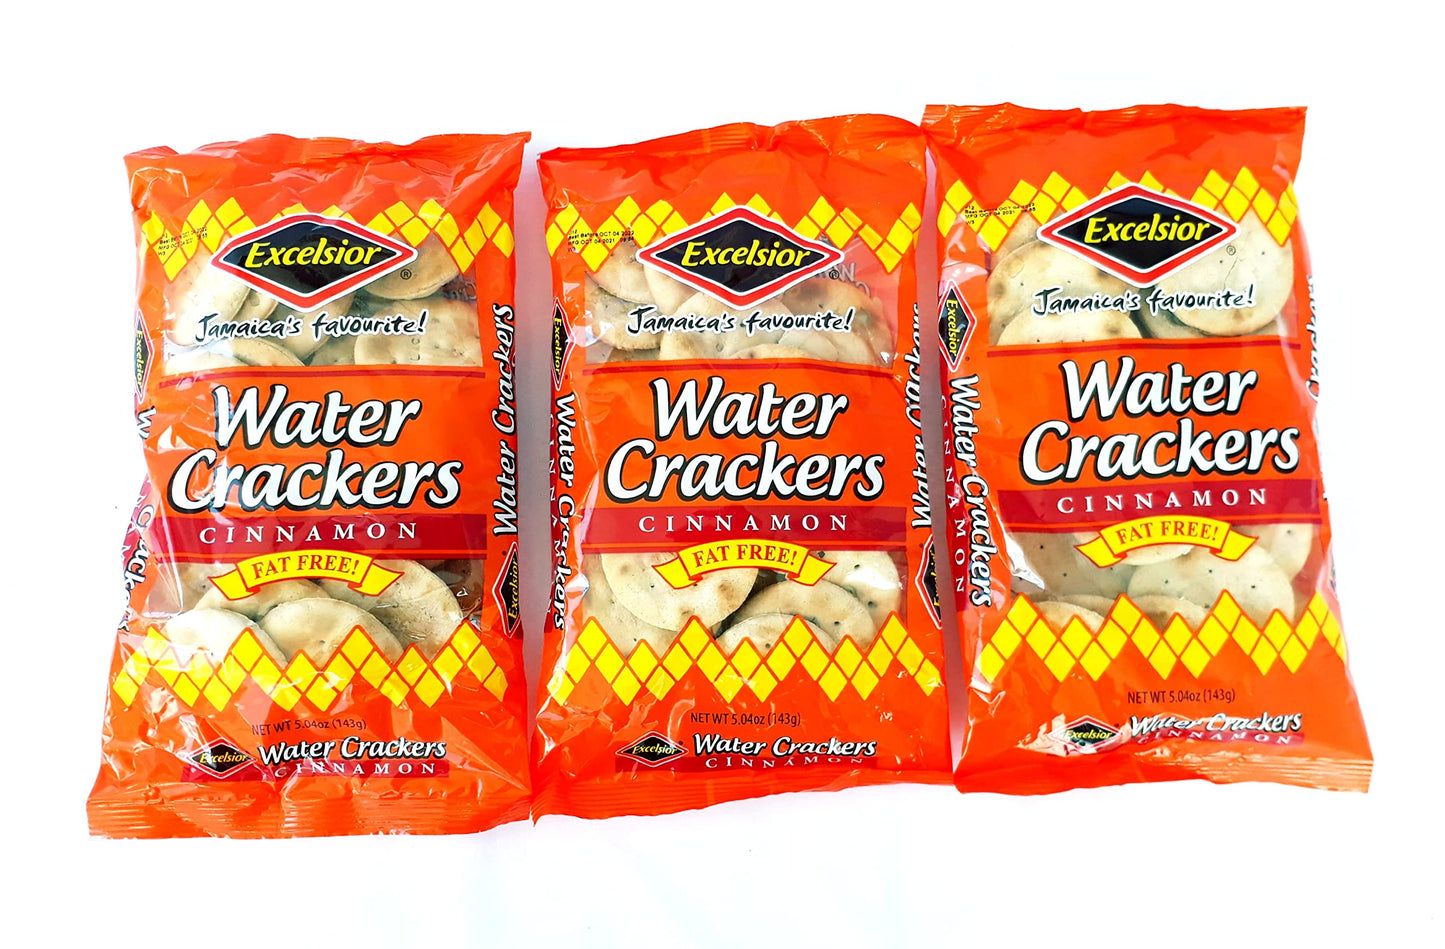 Excelsior Water Crackers FAT FREE Cinnamon 143g/5.04oz x 3 packs Jamaica's Favourite